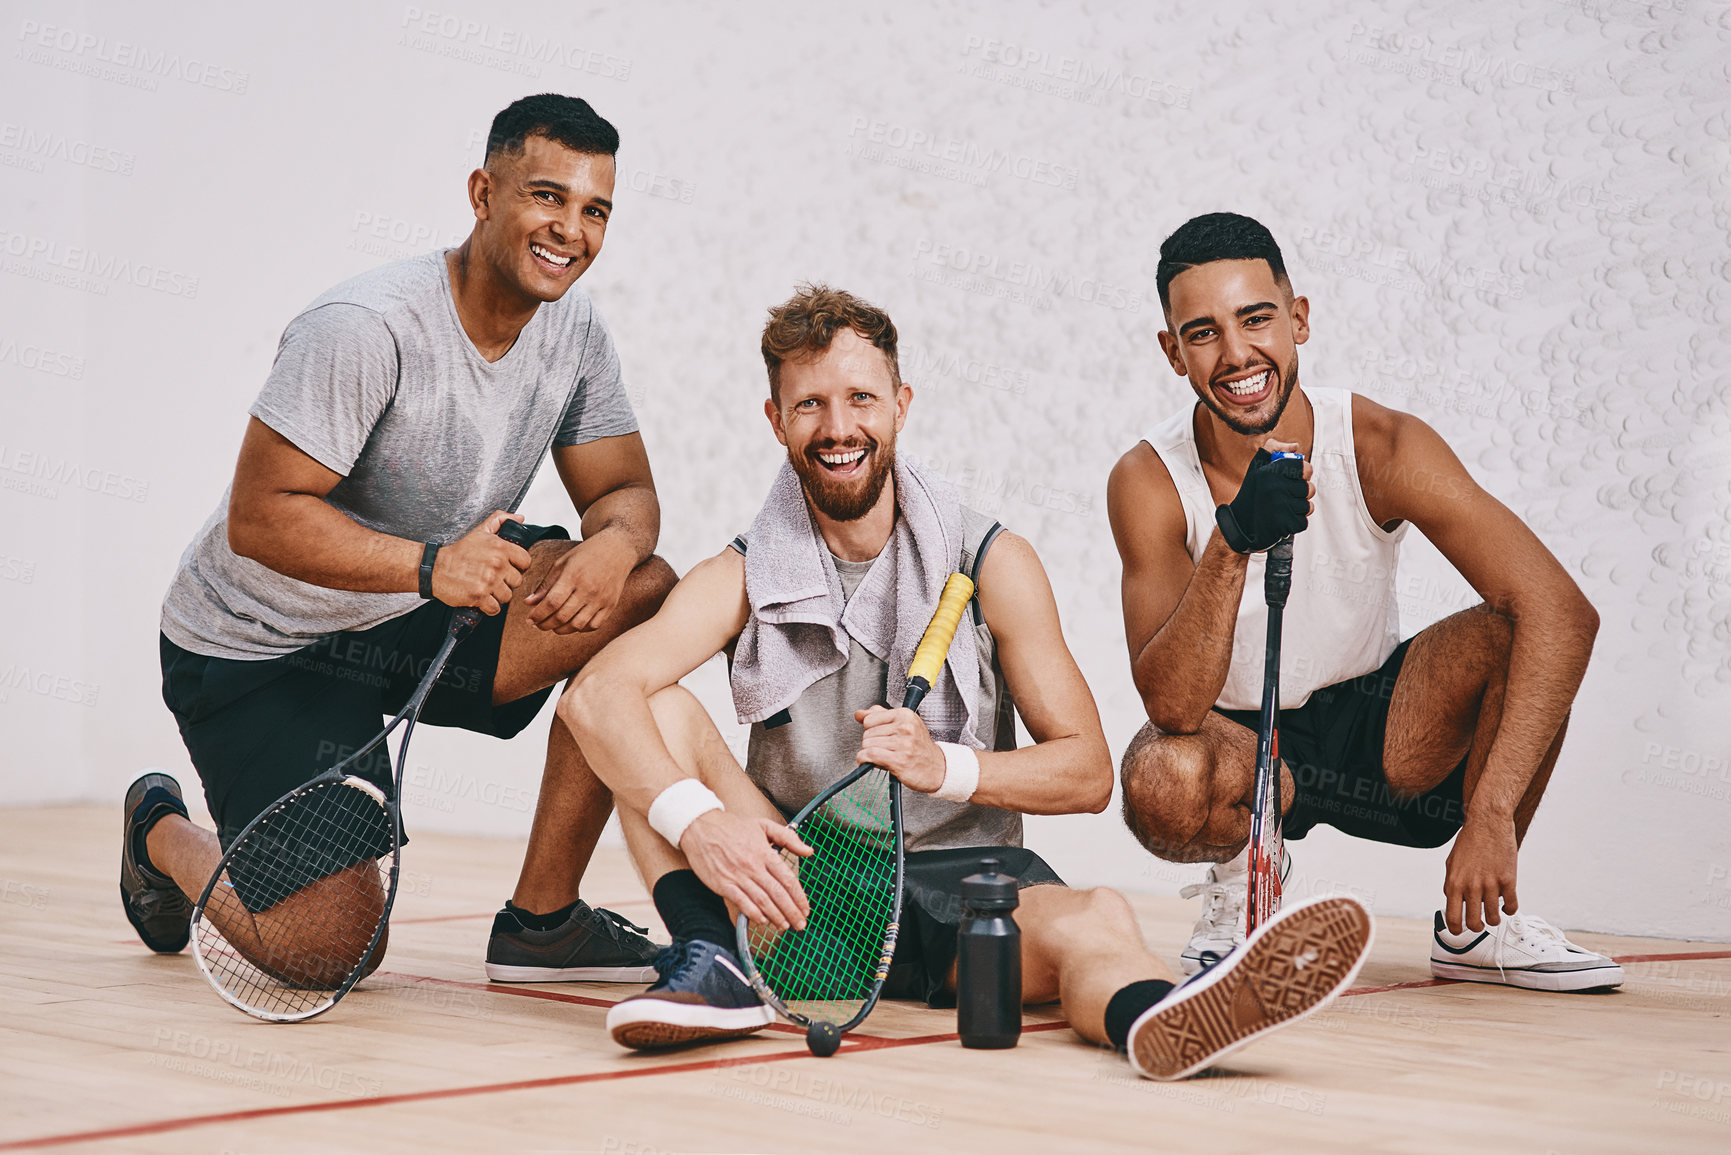 Buy stock photo Shot of three young men playing a game of squash